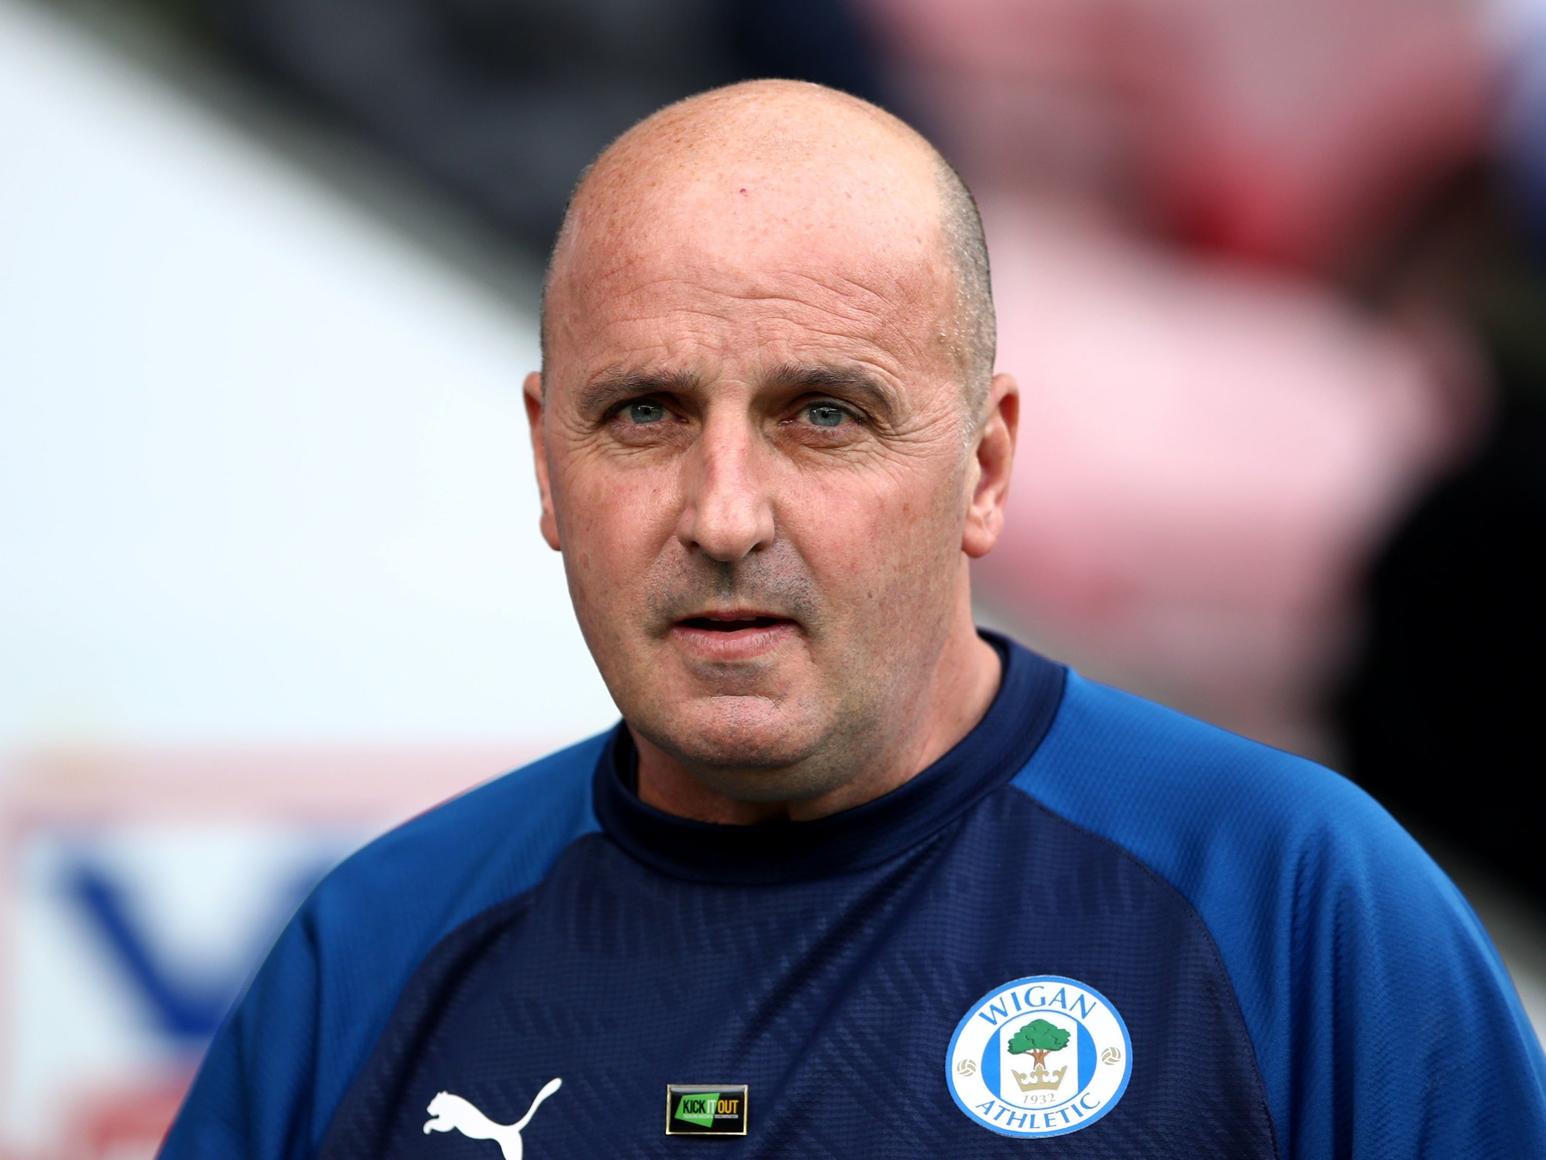 Sunderland decided against making an approach for Wigan Athletic manager Paul Cook because the Latics wanted 1m in compensation. (The Sun)